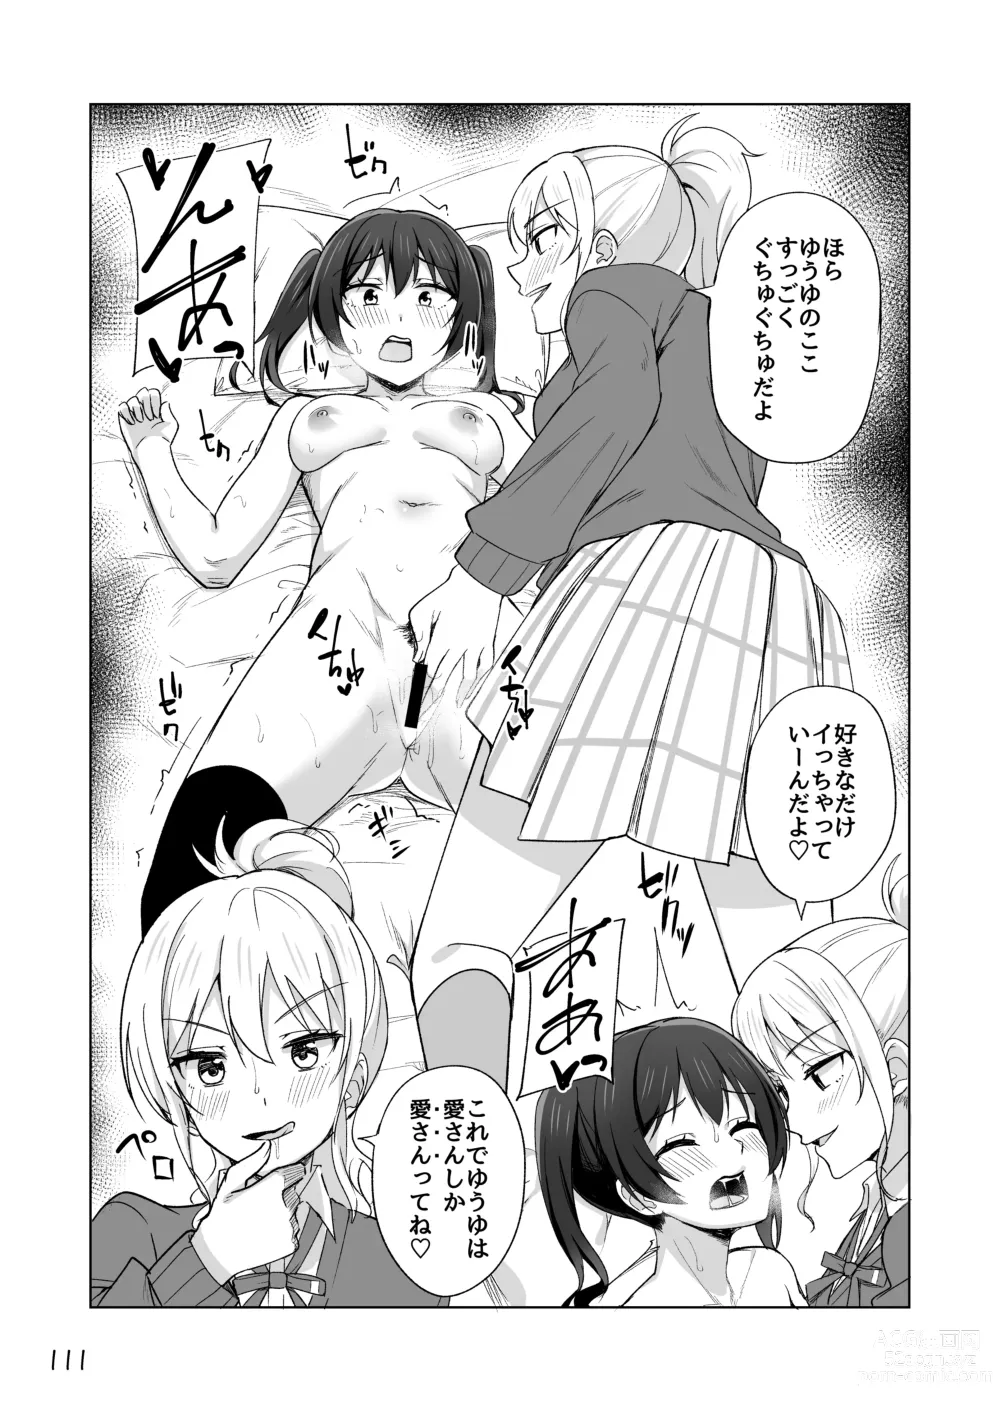 Page 115 of doujinshi Go for dream